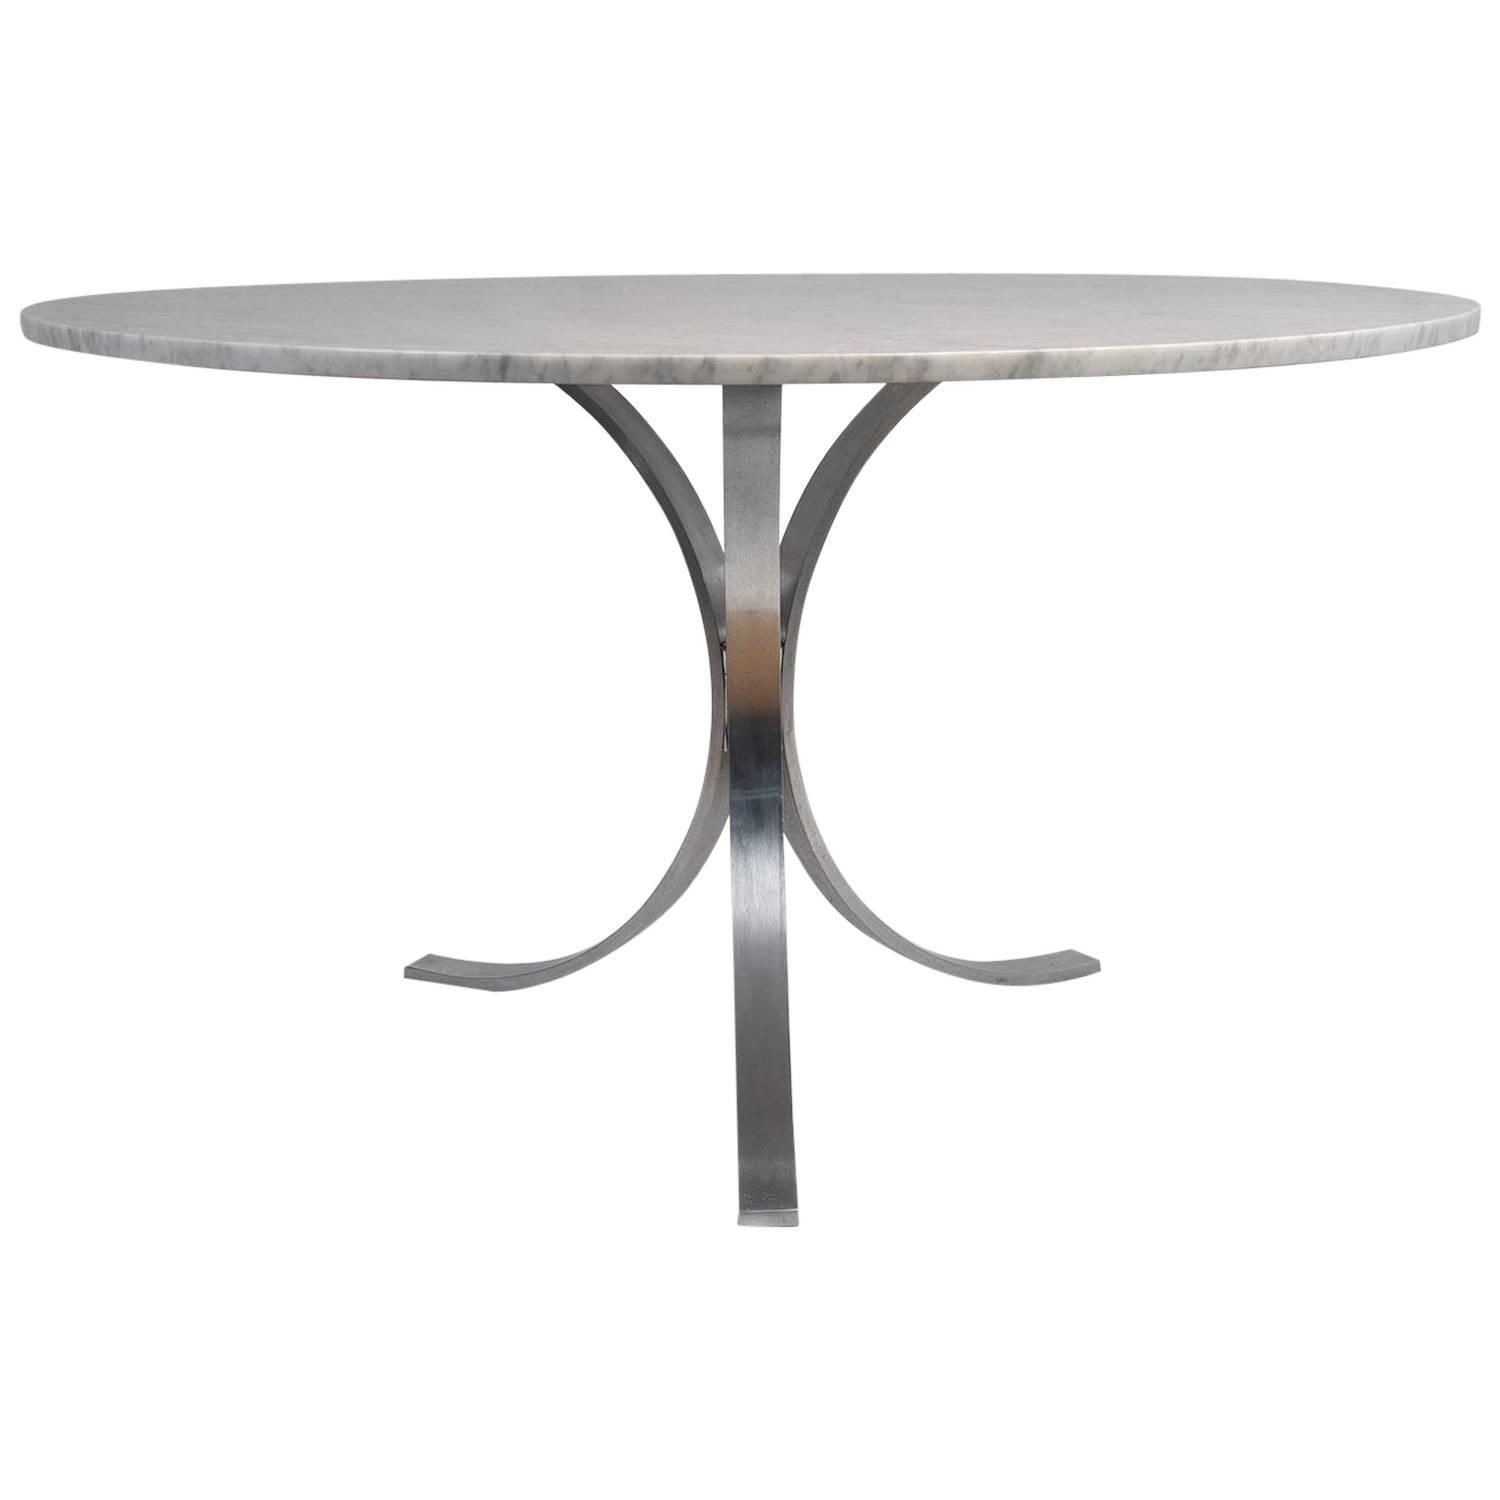 Mid Century Chrome Dining Table | Chrome Dining Table With Regard To Most Popular Chrome Metal Dining Tables (View 10 of 15)